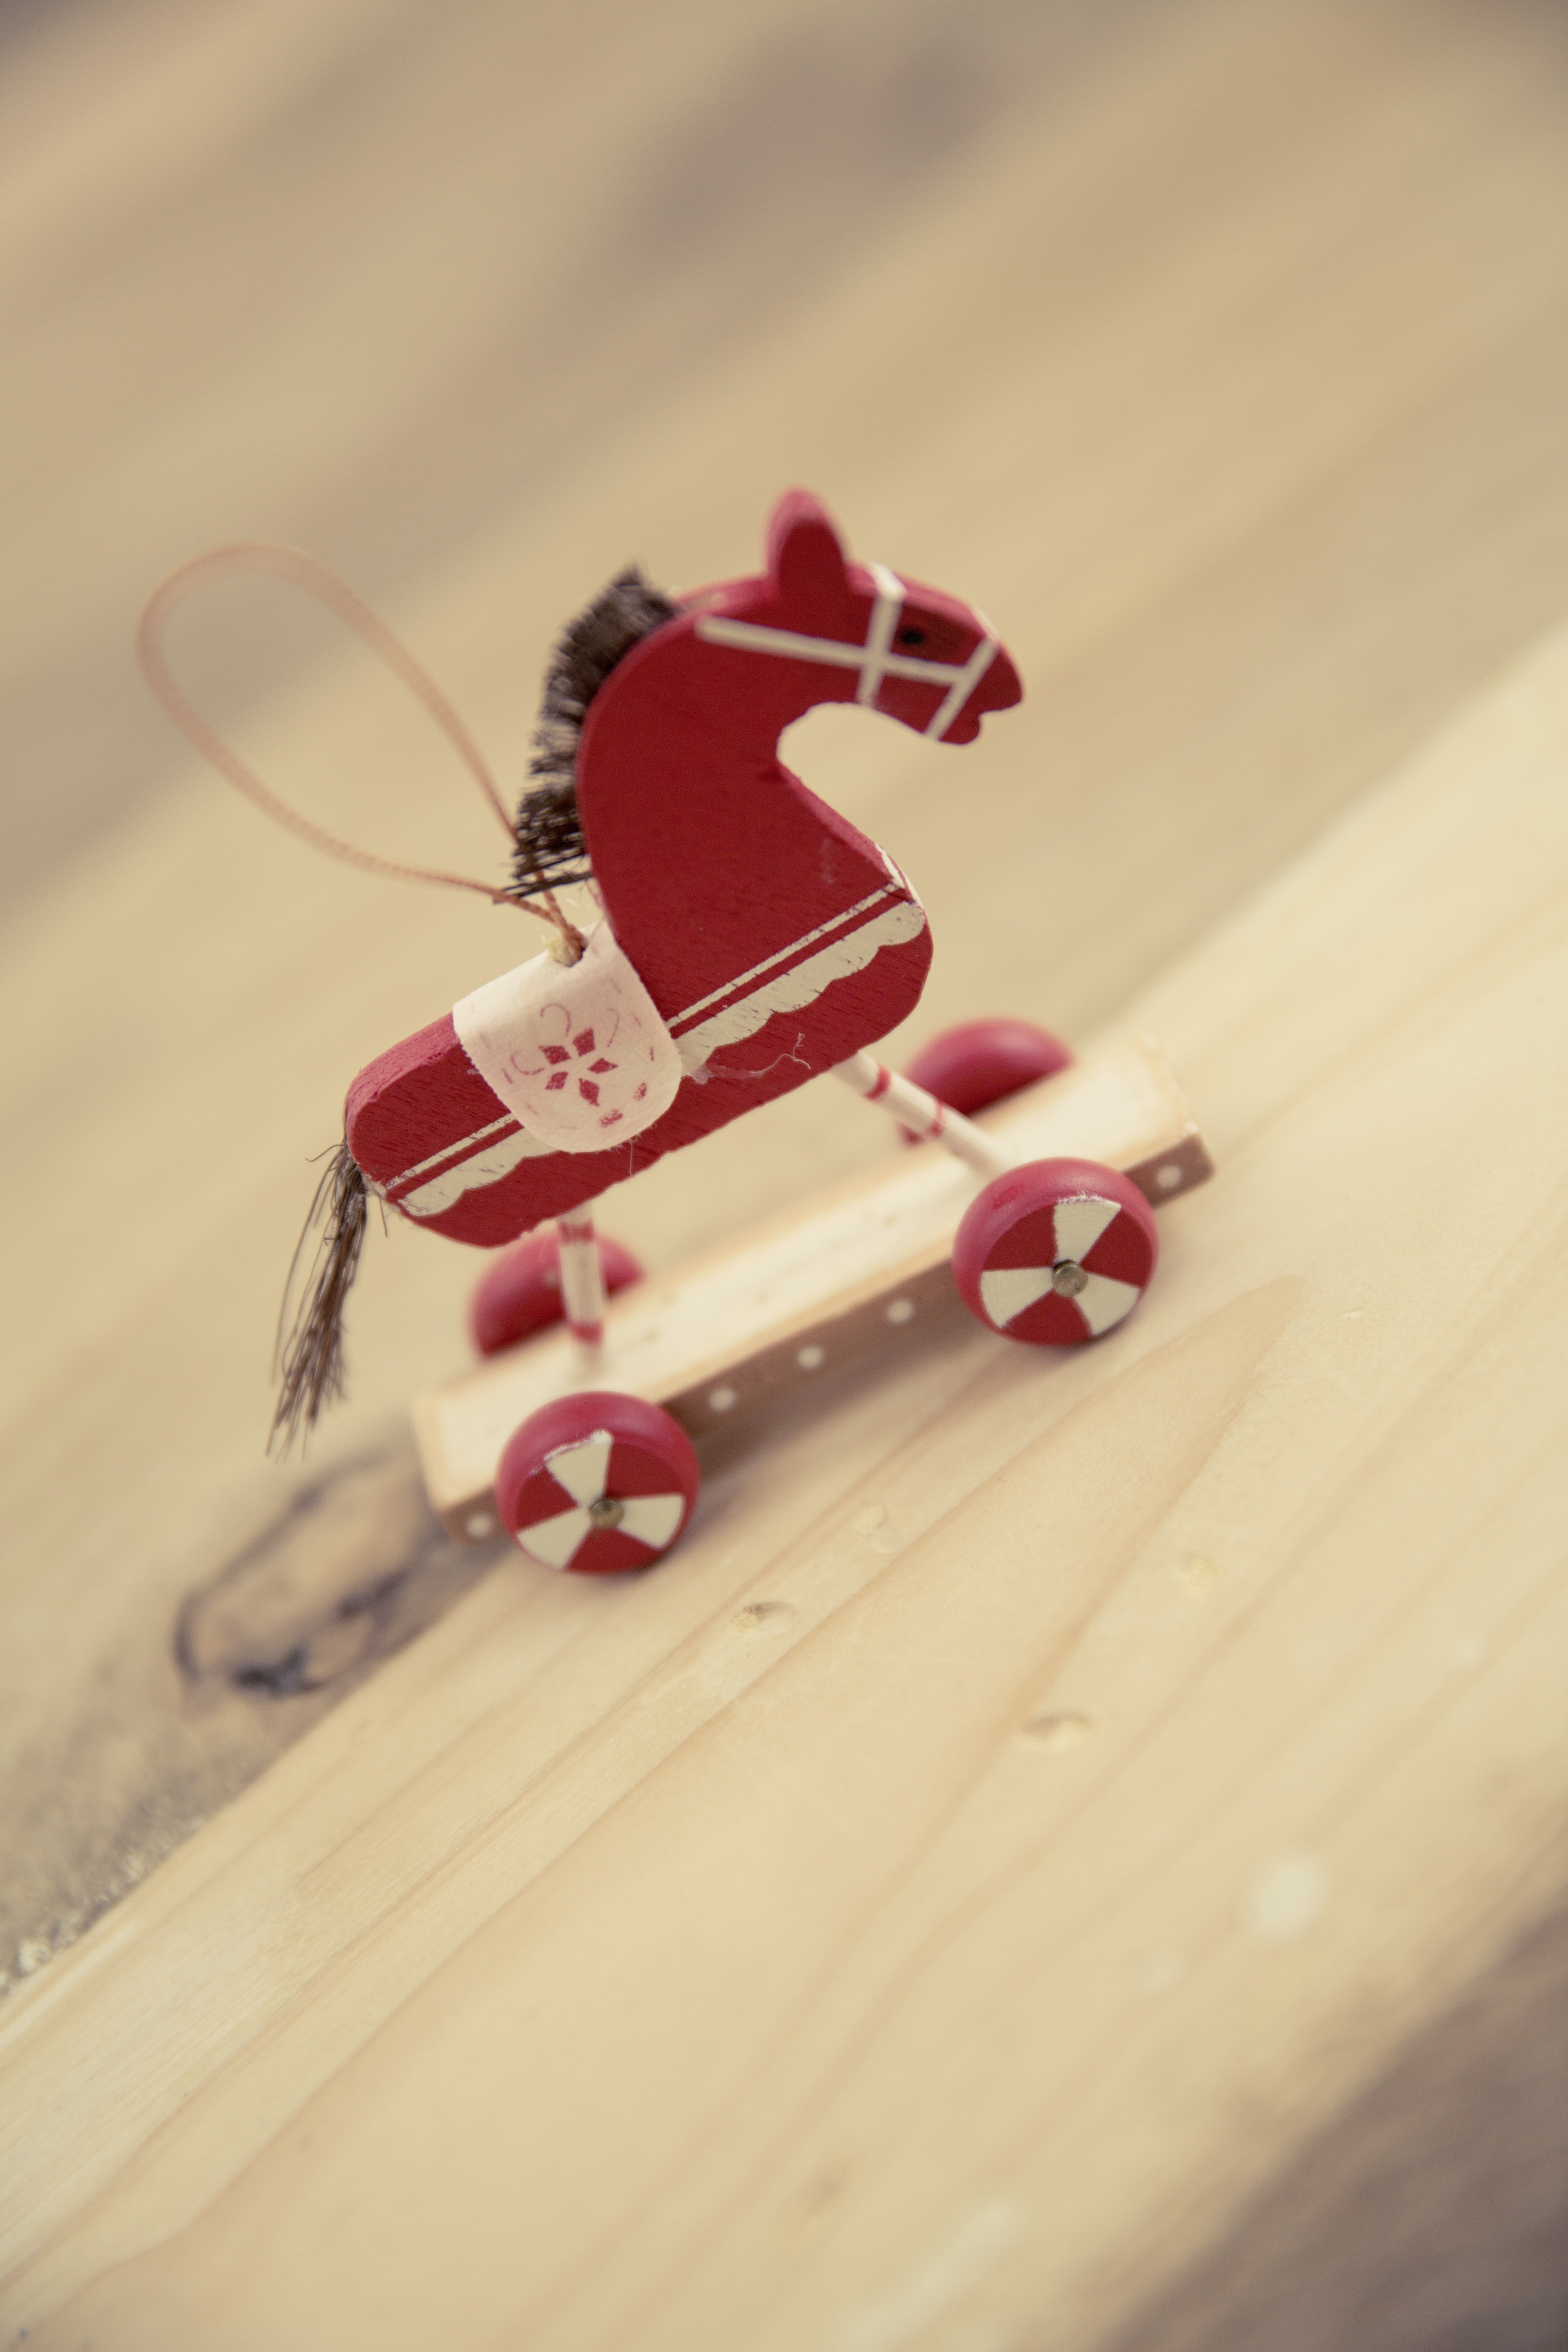 red and white wooden horse toy with wheels macro photography